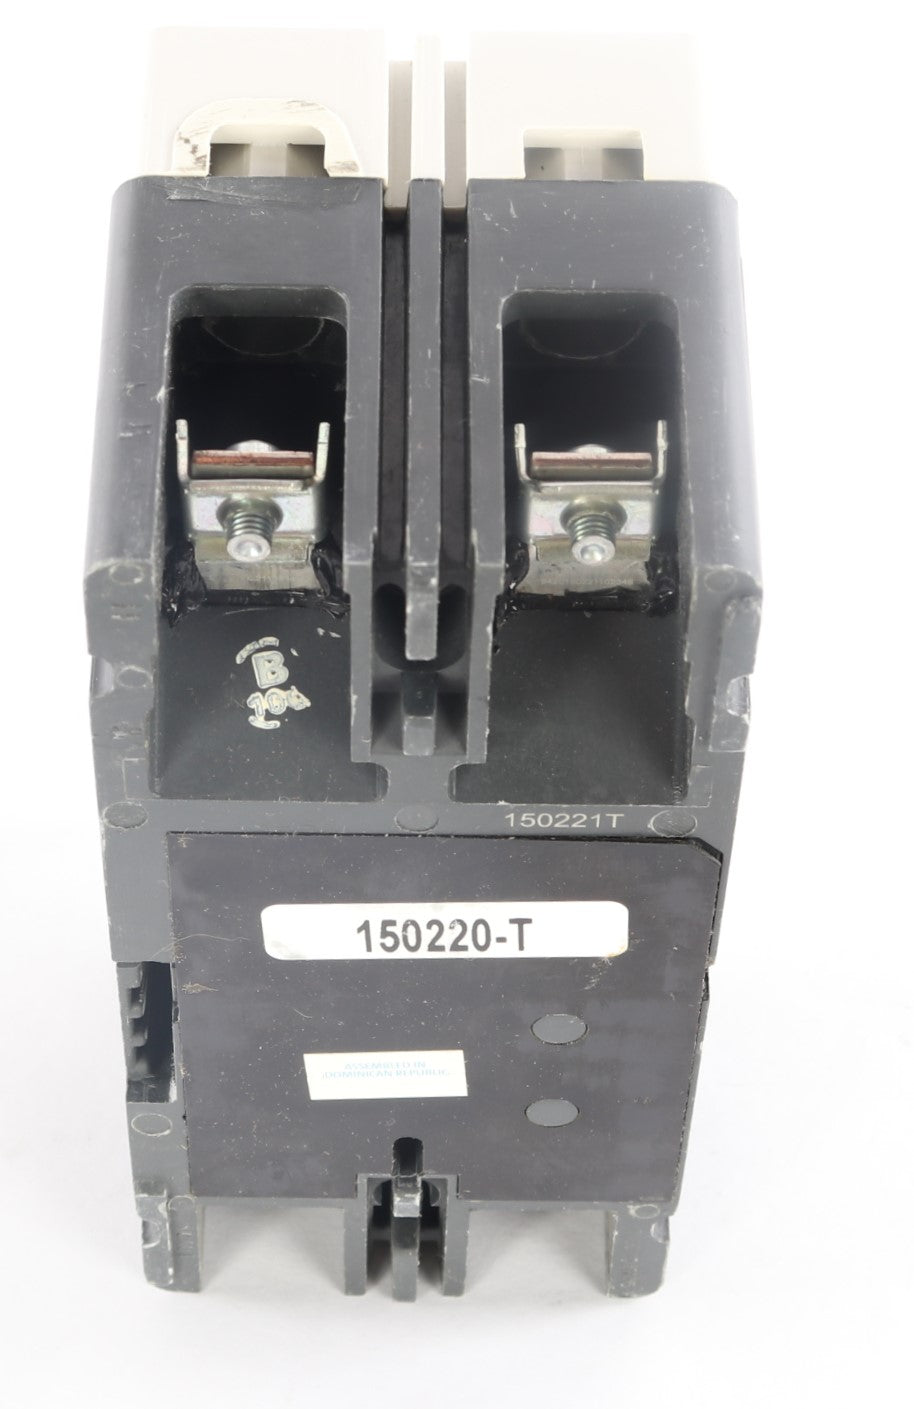 CUTLER HAMMER  ­-­ EHD2015L ­-­ CIRCUIT BREAKER 15A 2 POLE THERMAL MAGNETIC 480VAC